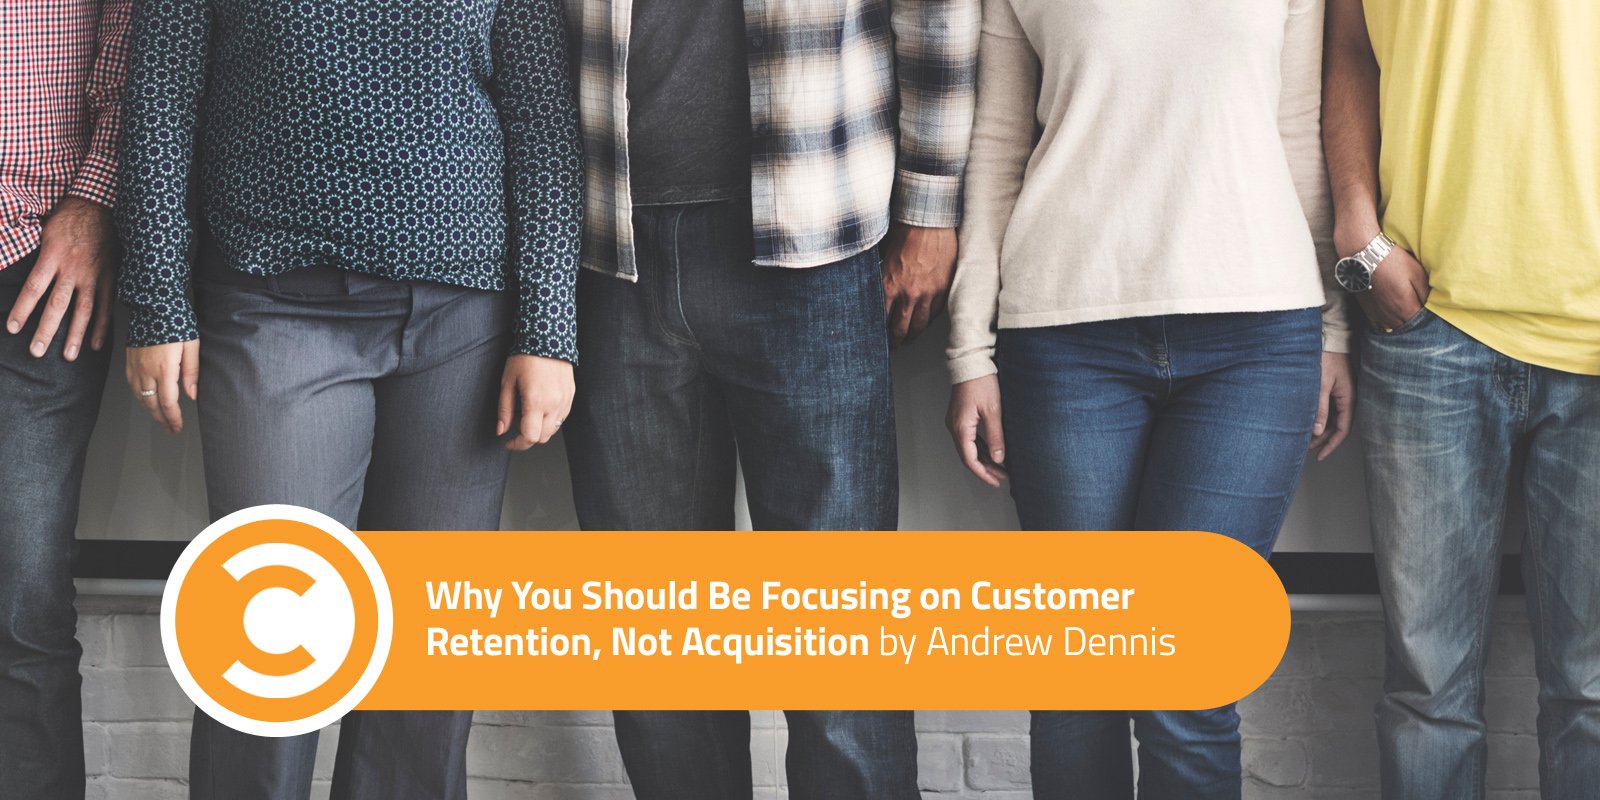 Why You Should Be Focusing on Customer Retention, Not Acquisition